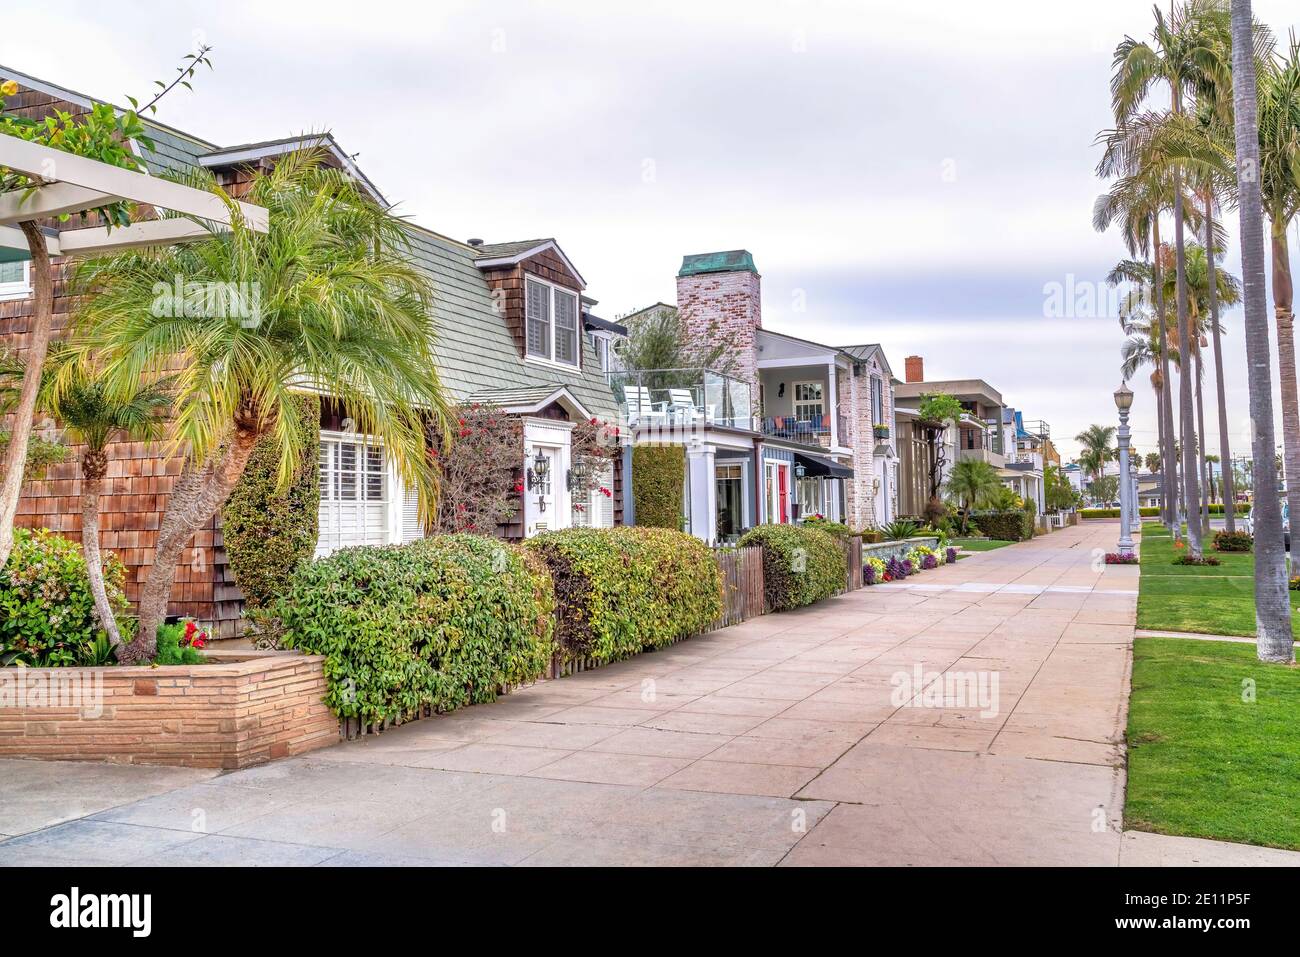 Charming town in Long Beach California with houses on palm tree